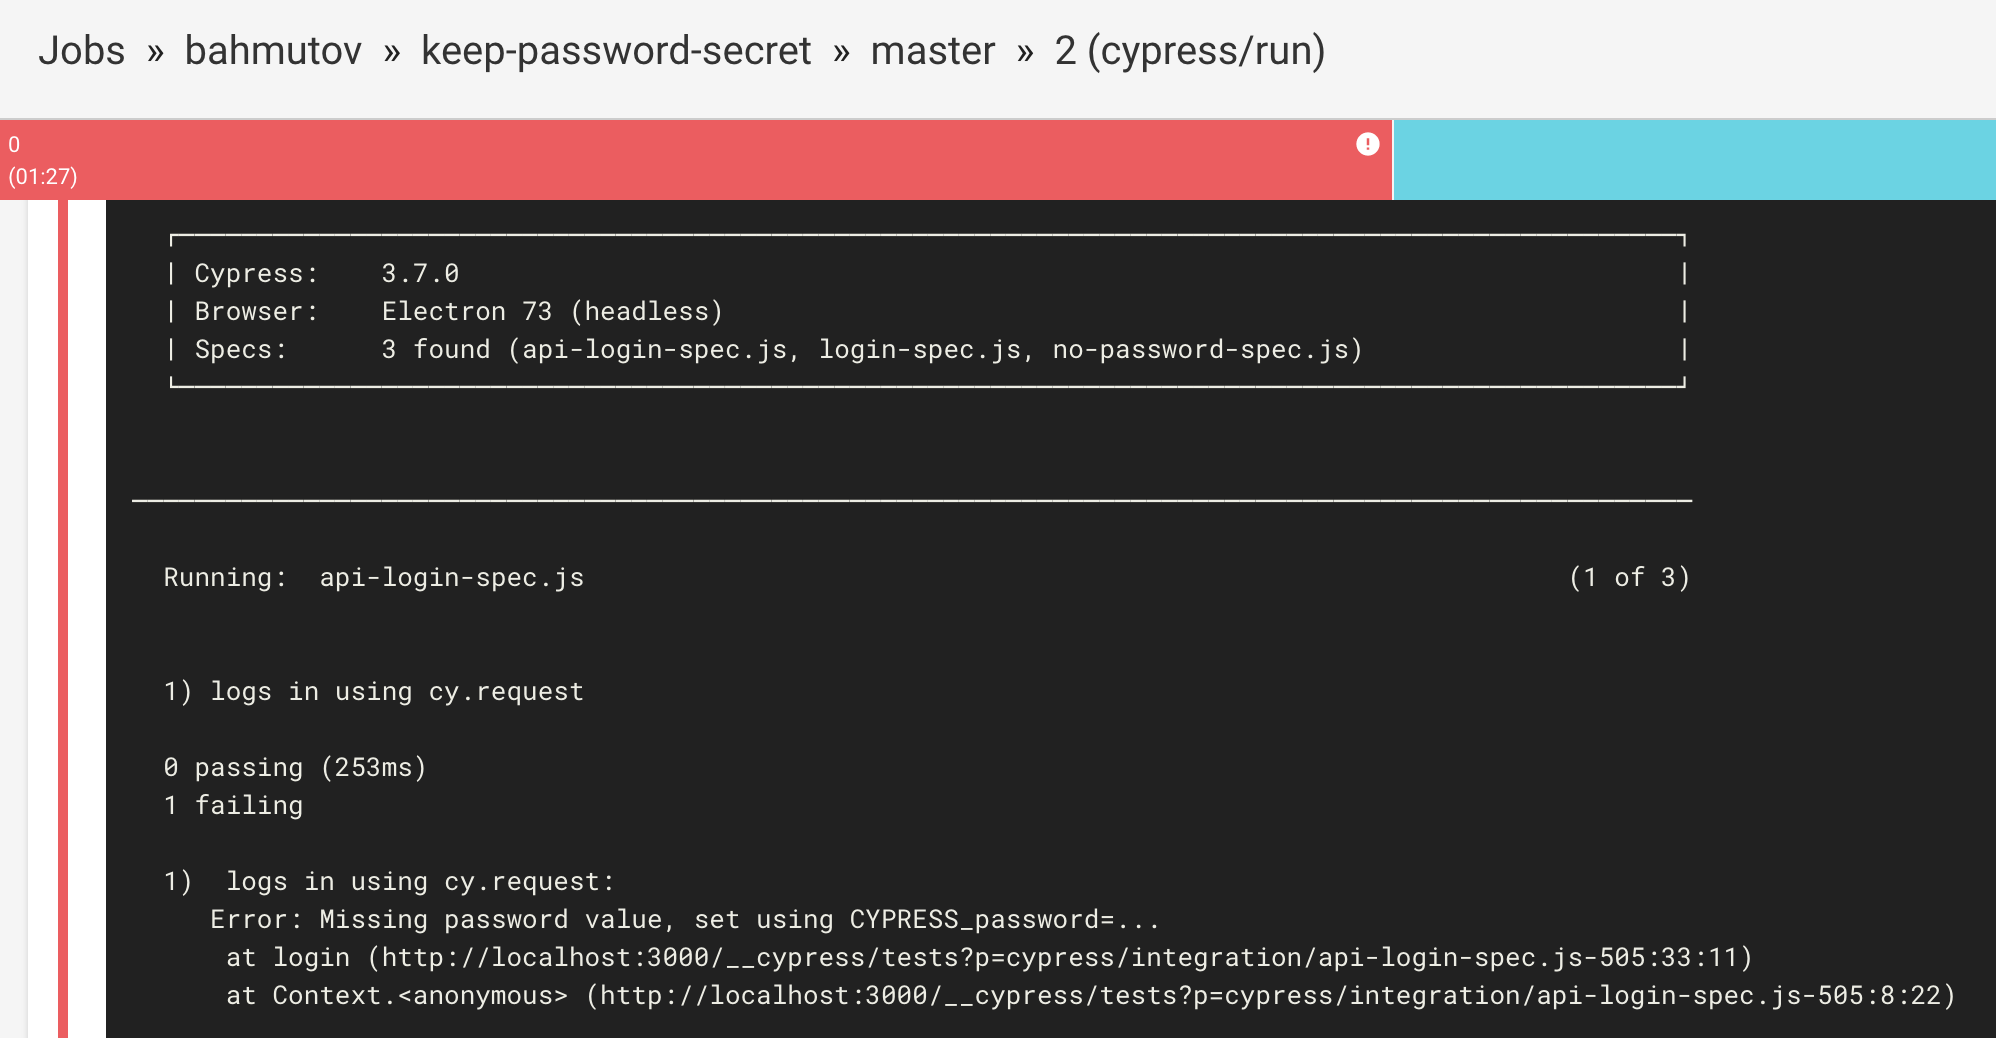 Run fails because we have not set CYPRESS_password yet